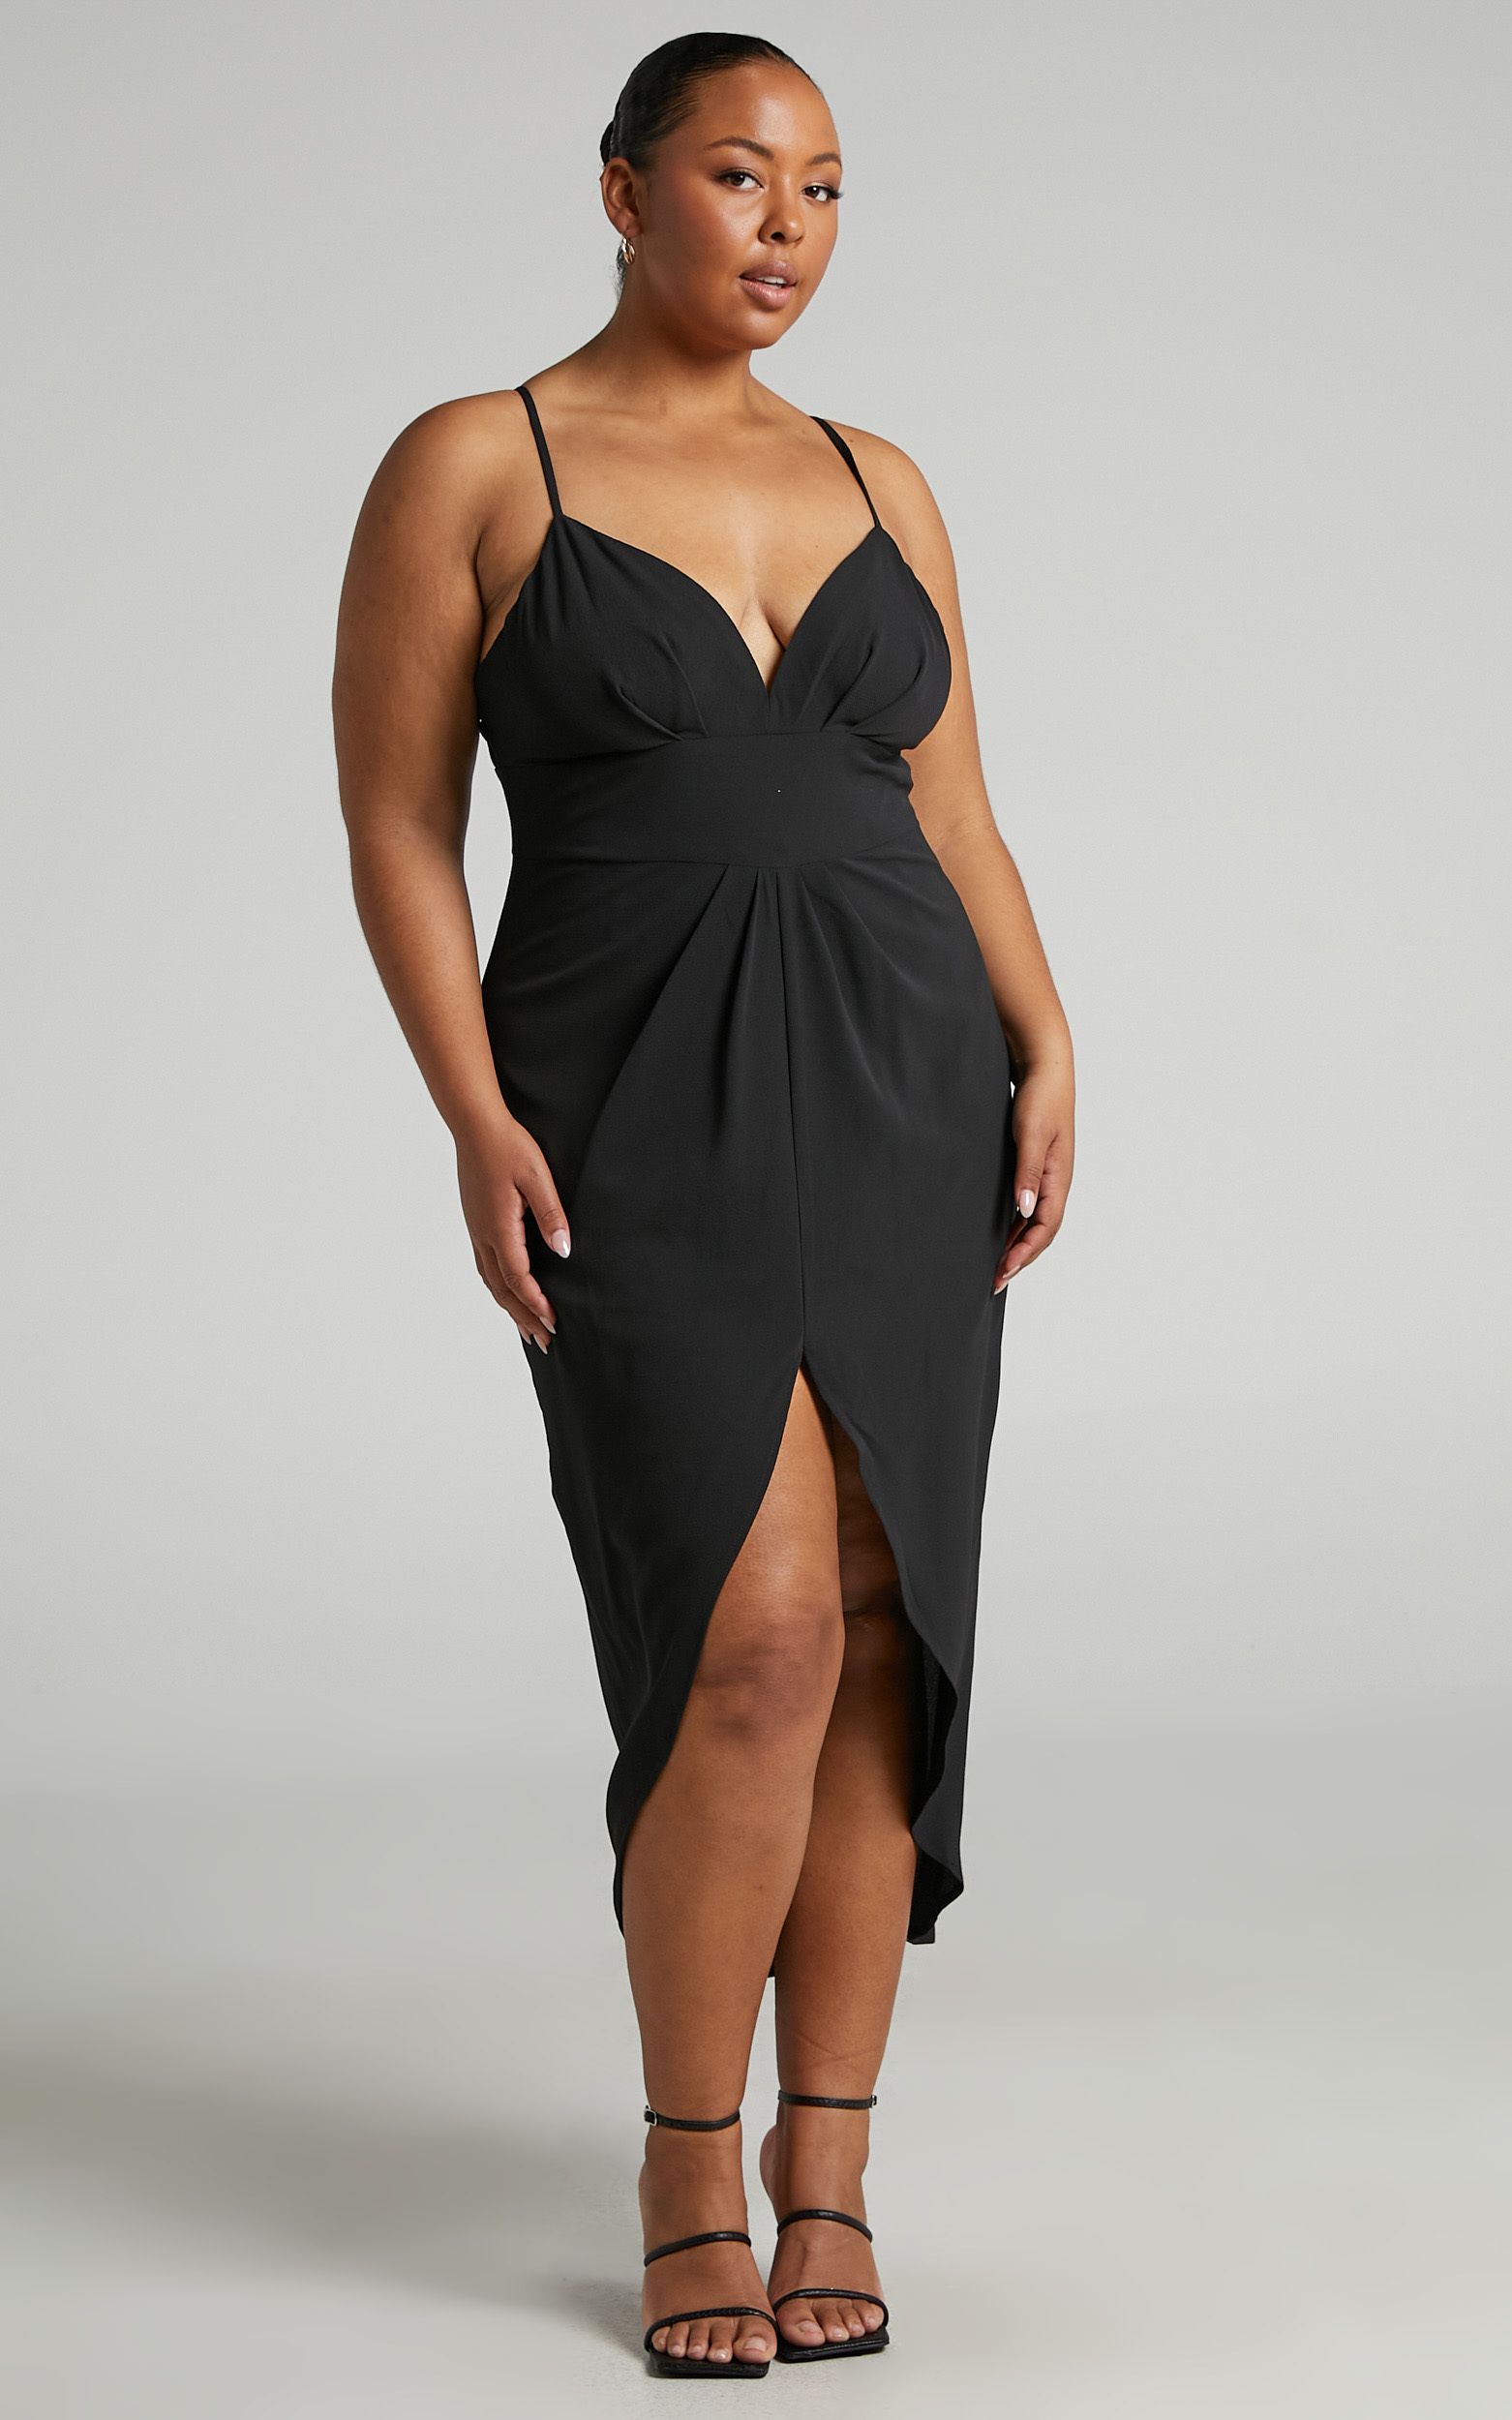 Fenella Sweetheart Drape Front Midi Dress in Black - 04, BLK1, hi-res image number null